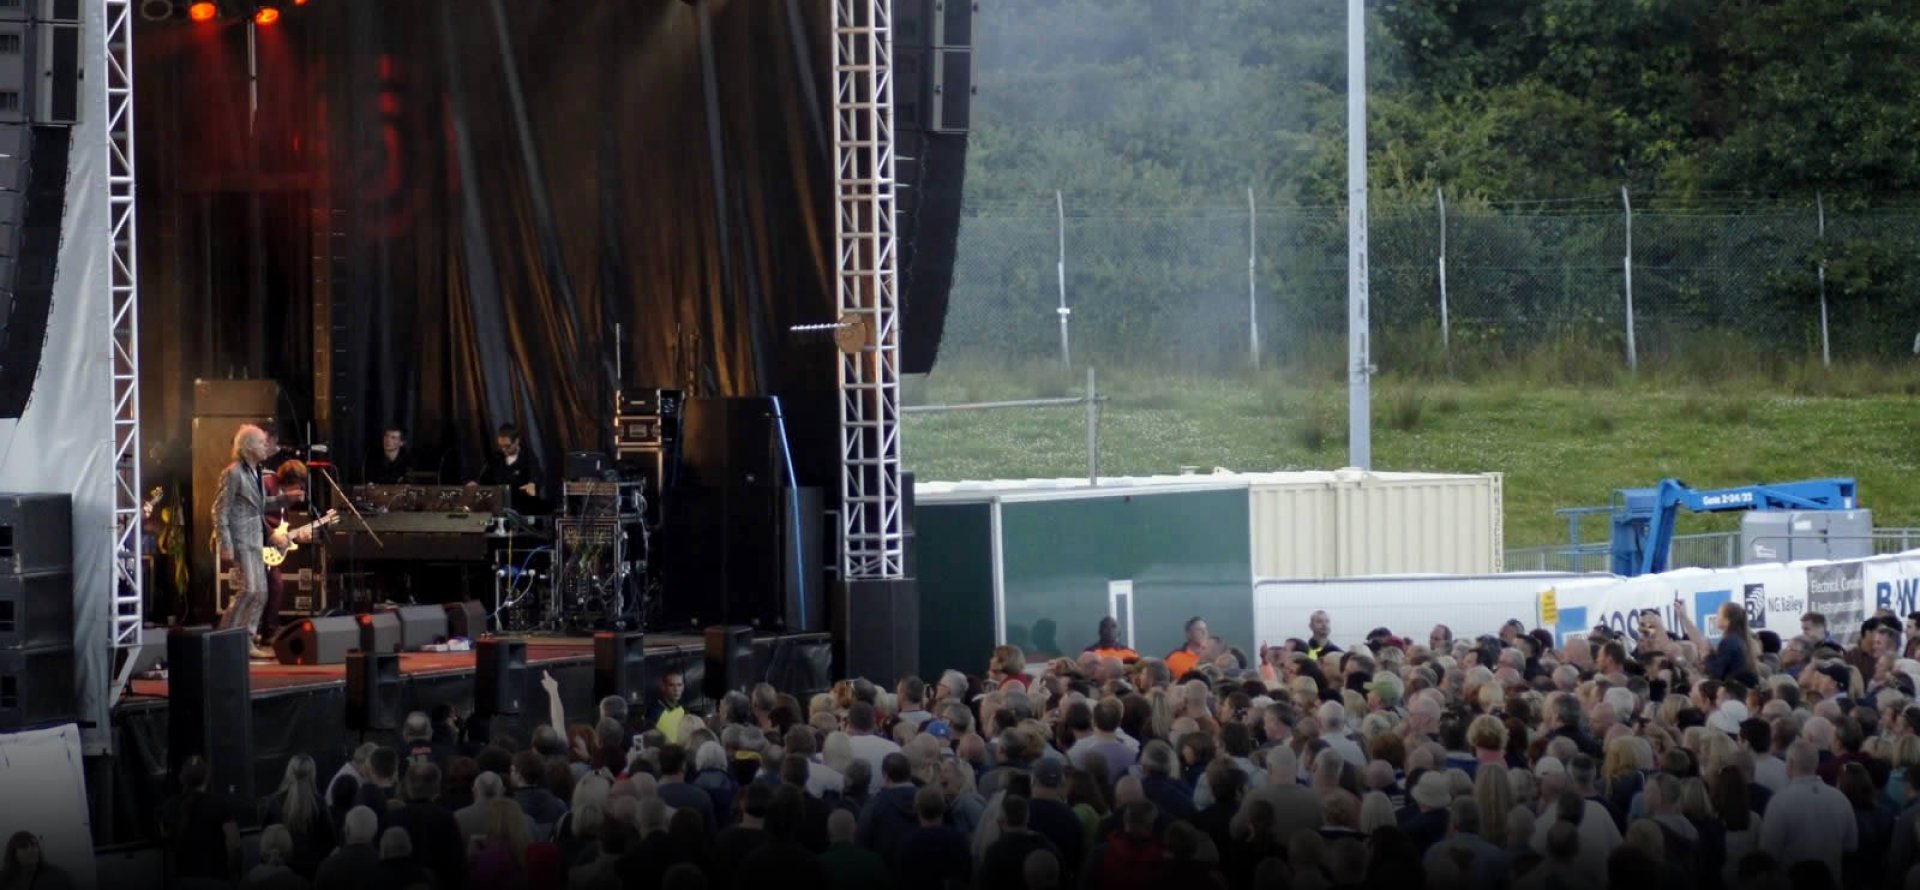 Pro-Tect UK security for music festivals and events